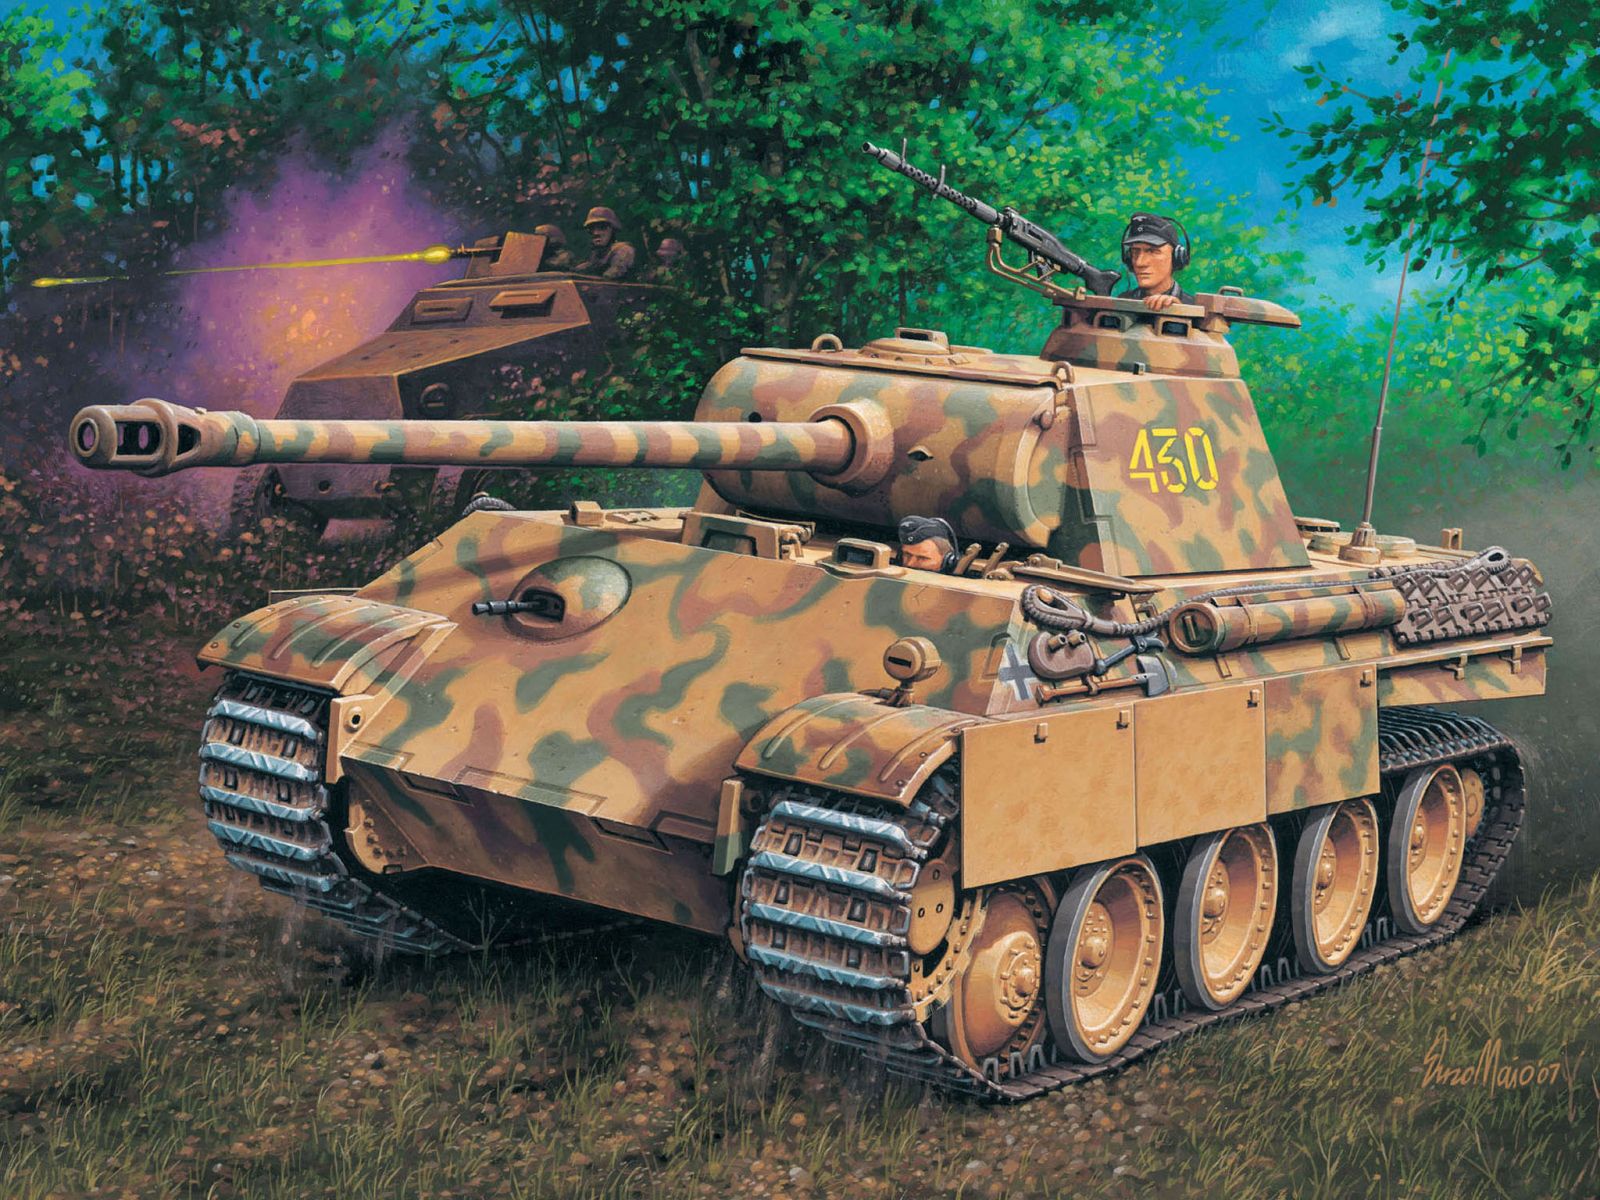 Revell 03171 - PzKpfw V Panther Ausf.G (Sd.Kfz. 171)